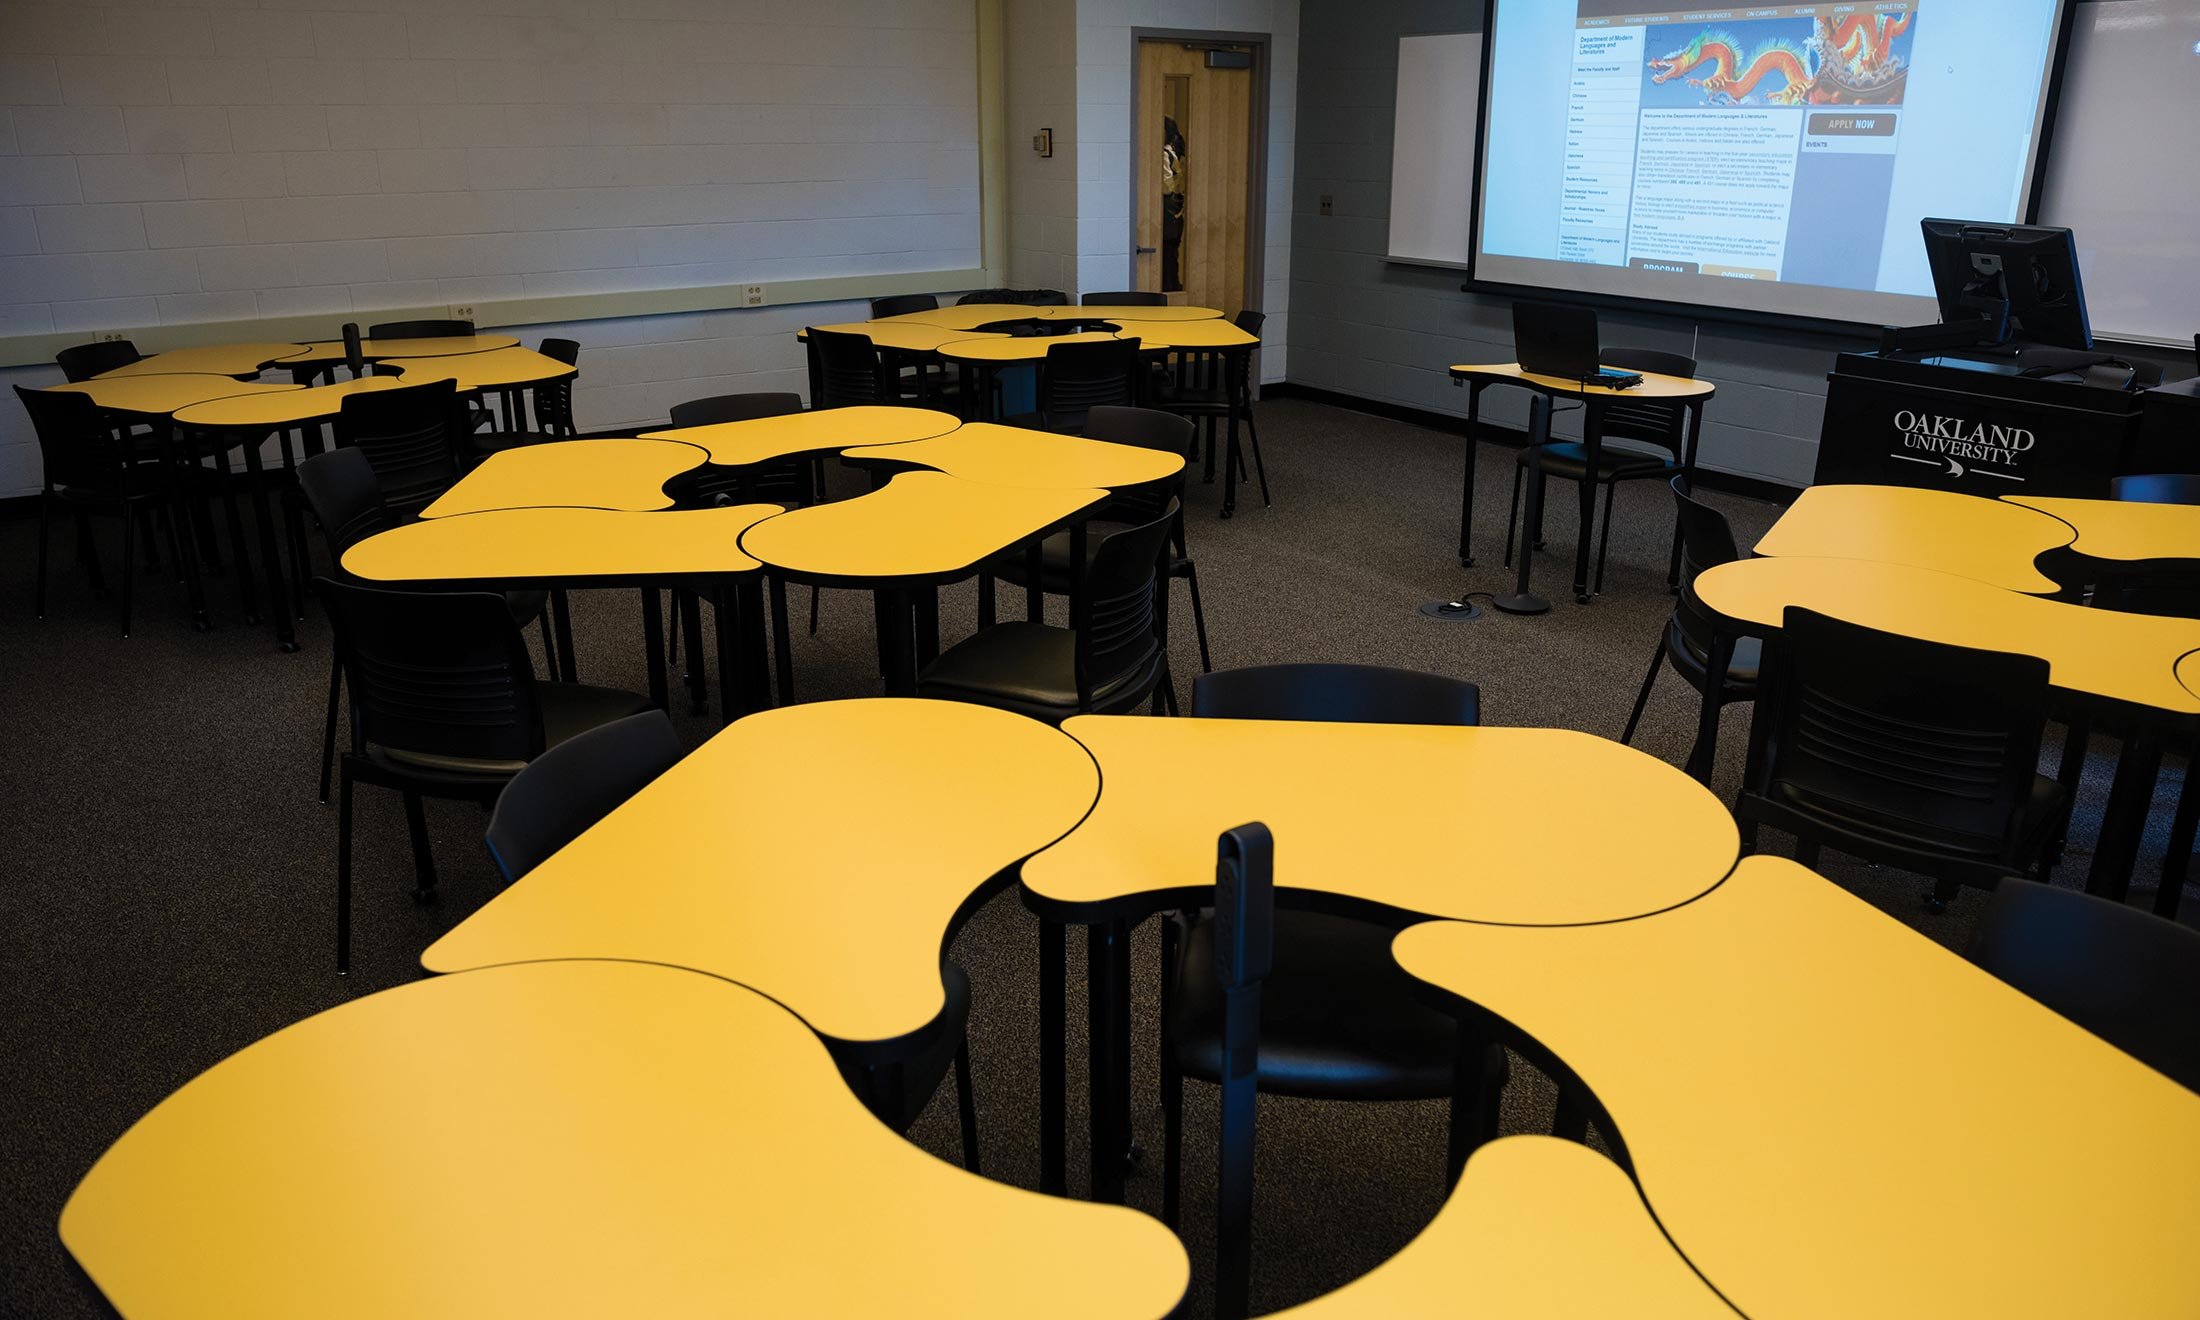 Department of Modern languages and Literatures classroom full of yellow desks with plugs for power